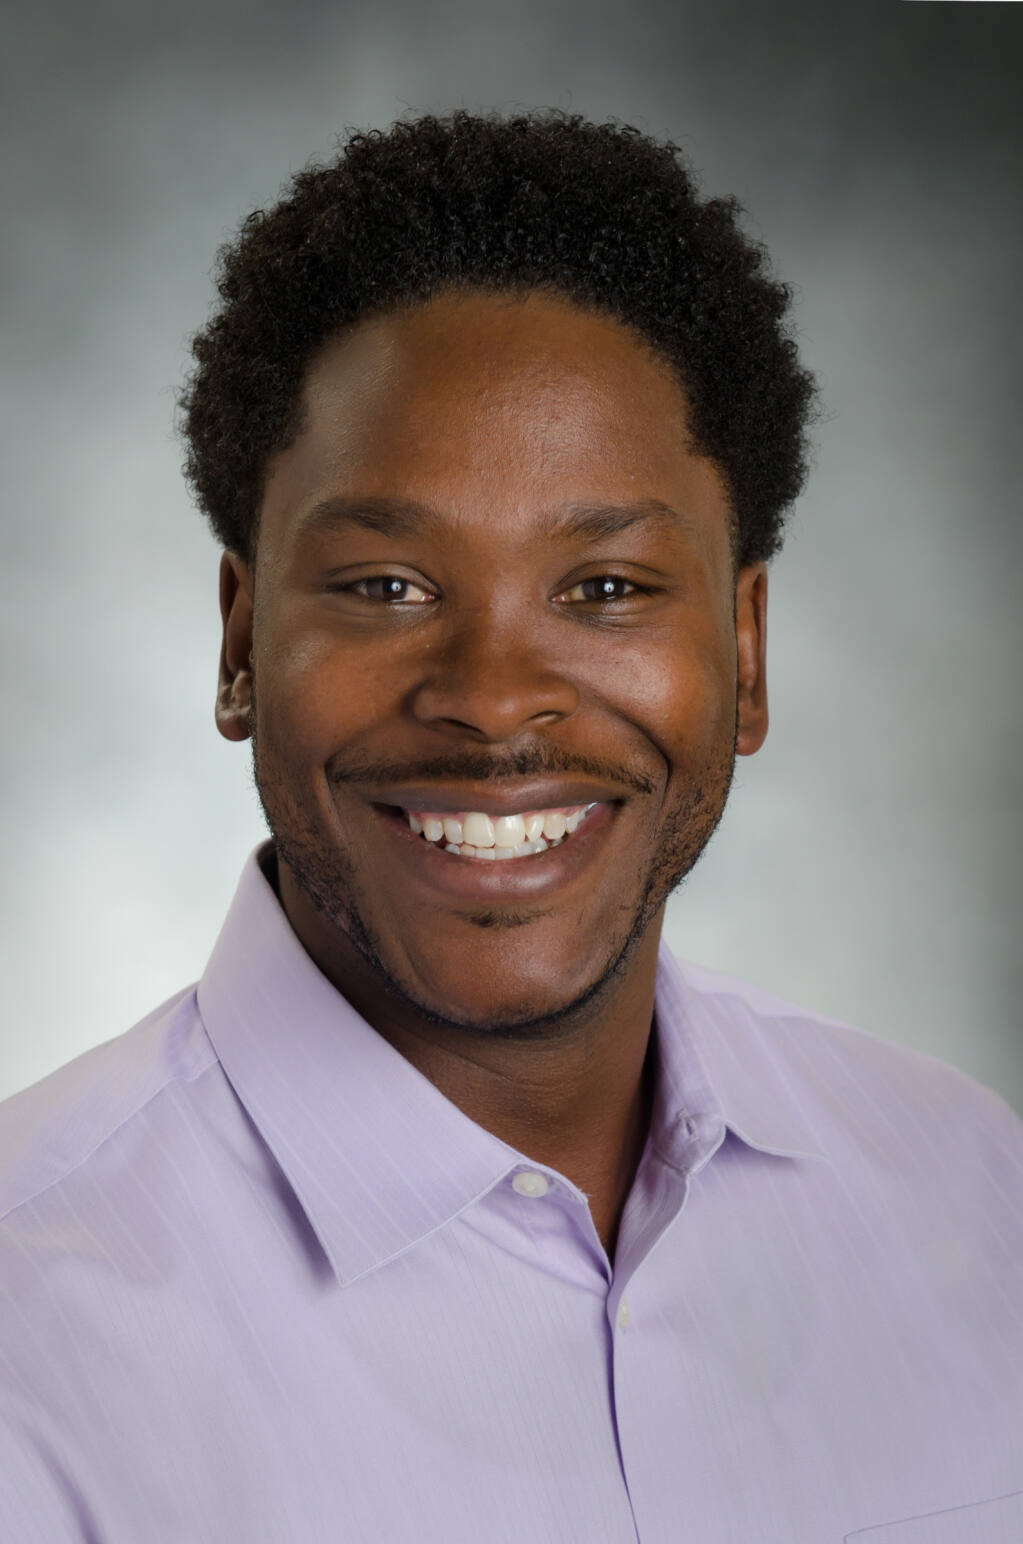 Rondell Gibson is promoted to director of North Bay programs of 10,000 Degrees in San Rafael in 2021. (courtesy of 10,000 Degrees)